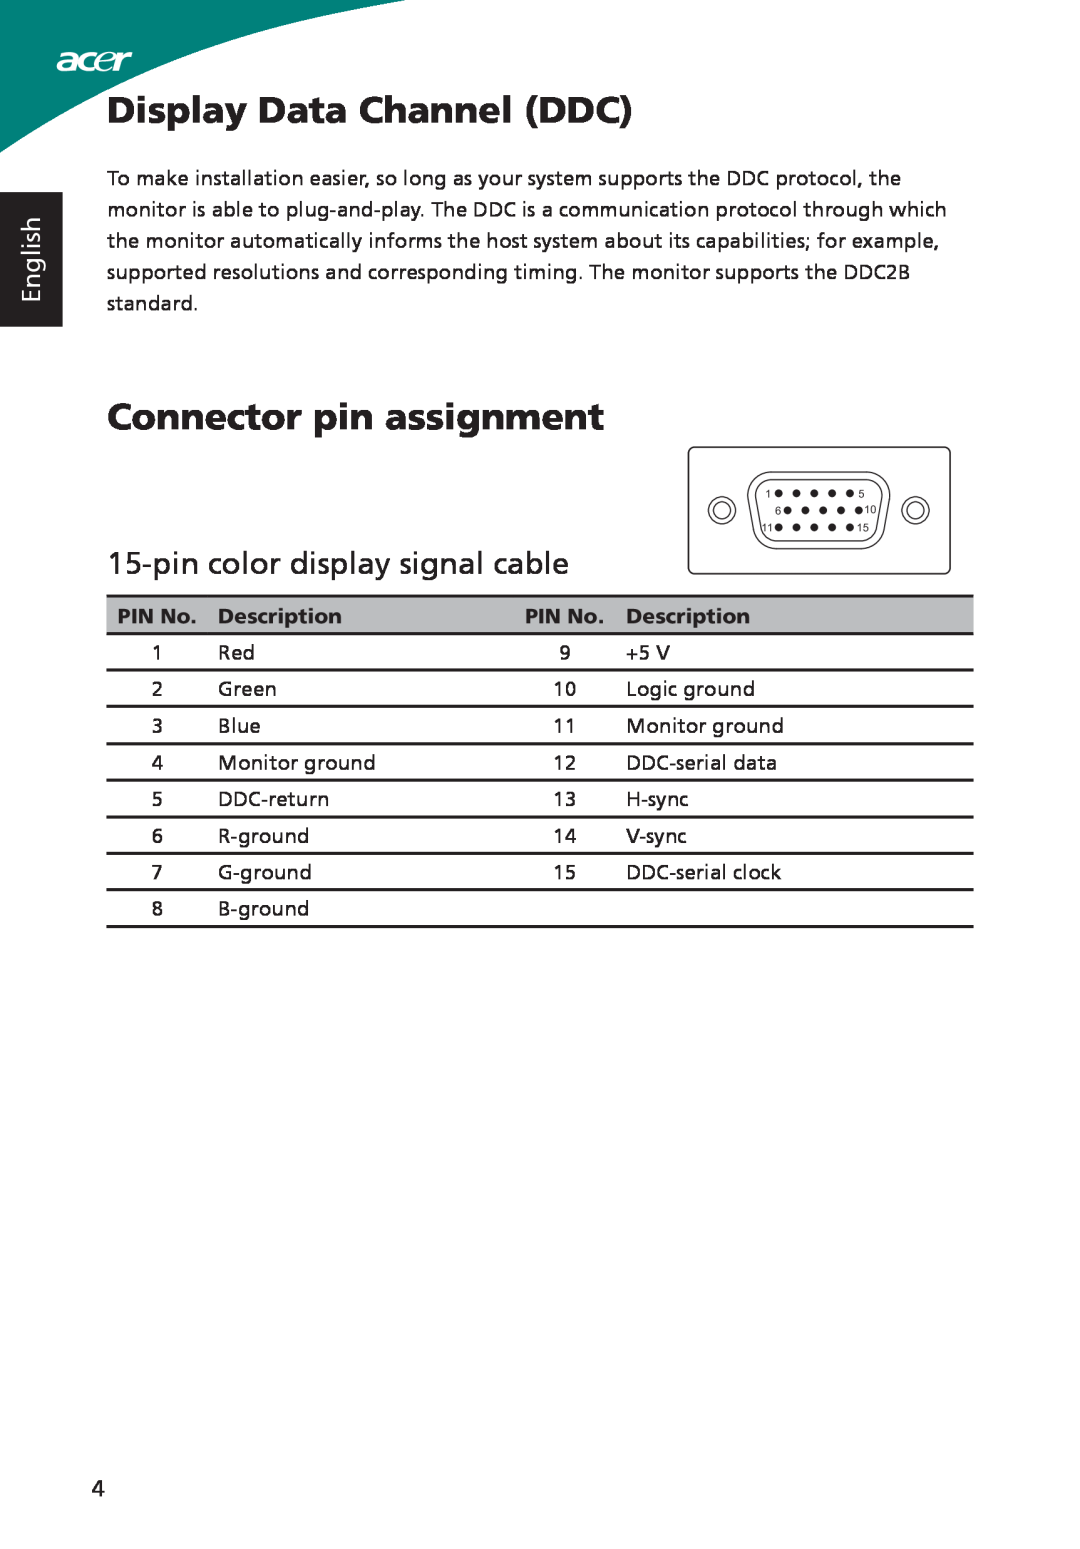 Acer S220HQL, S230HL Display Data Channel DDC, Connector pin assignment, pin color display signal cable, English, PIN No 